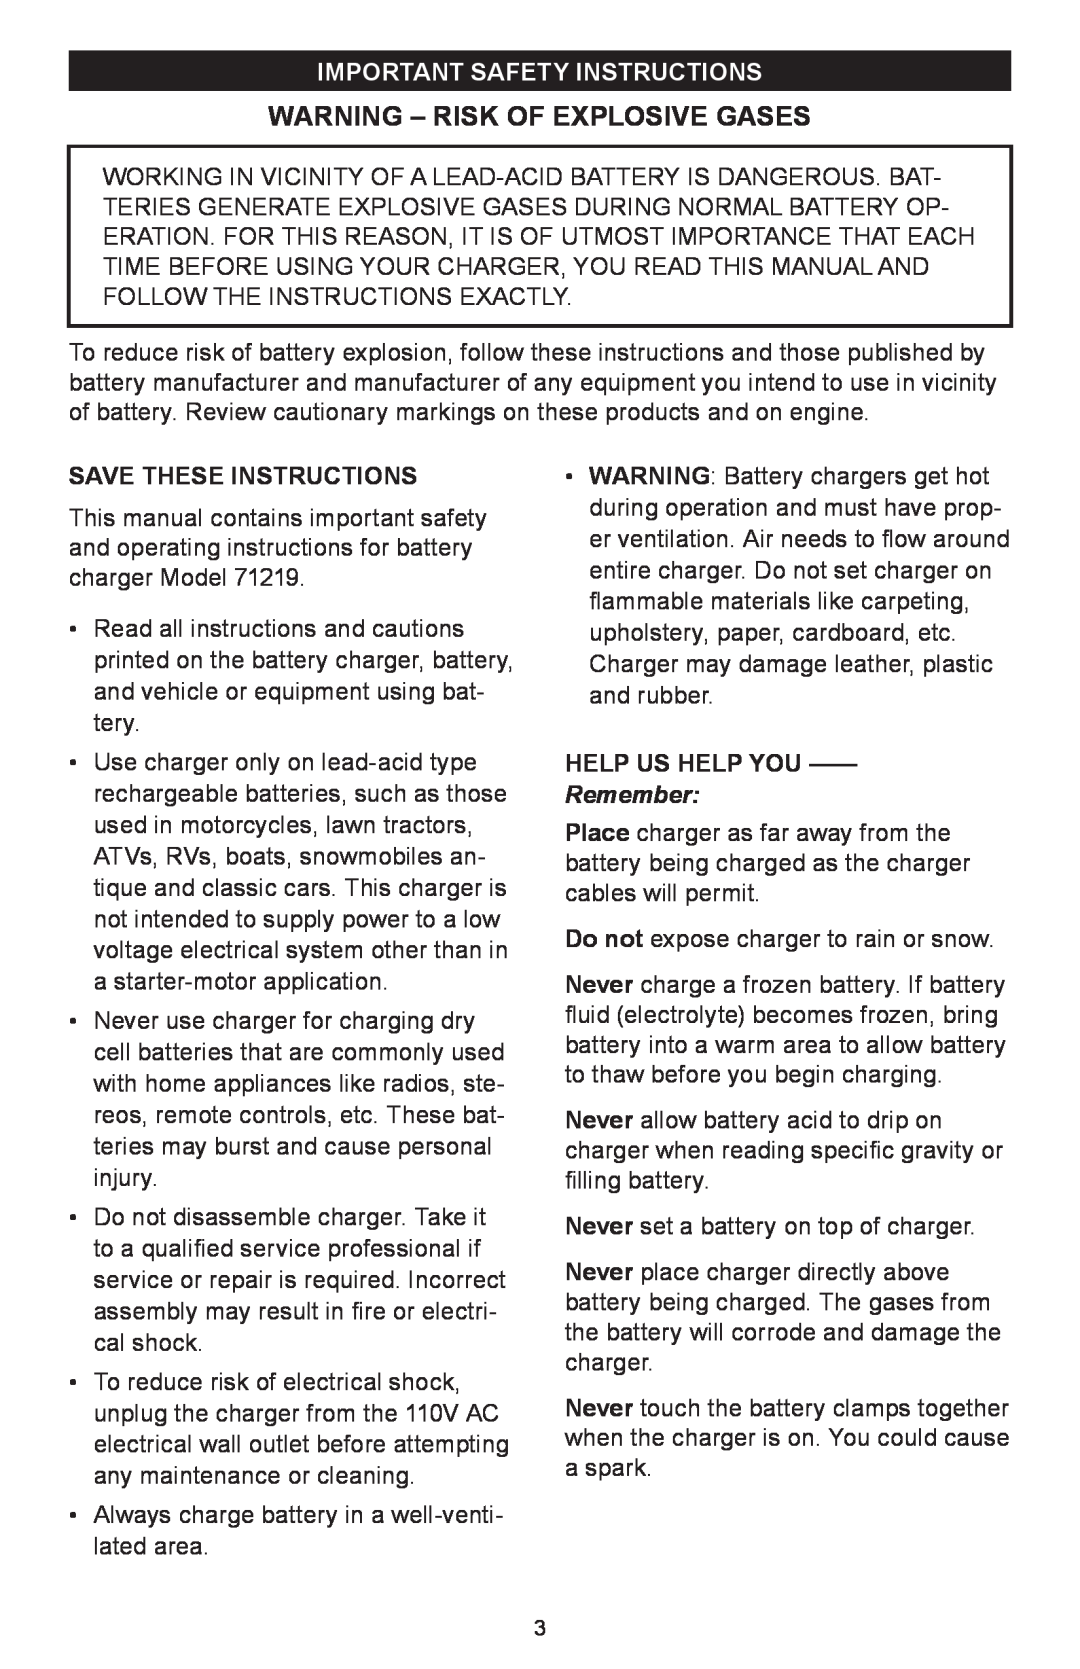 Sears 200.71219 owner manual Warning - Risk Of Explosive Gases, Important Safety Instructions, Remember 